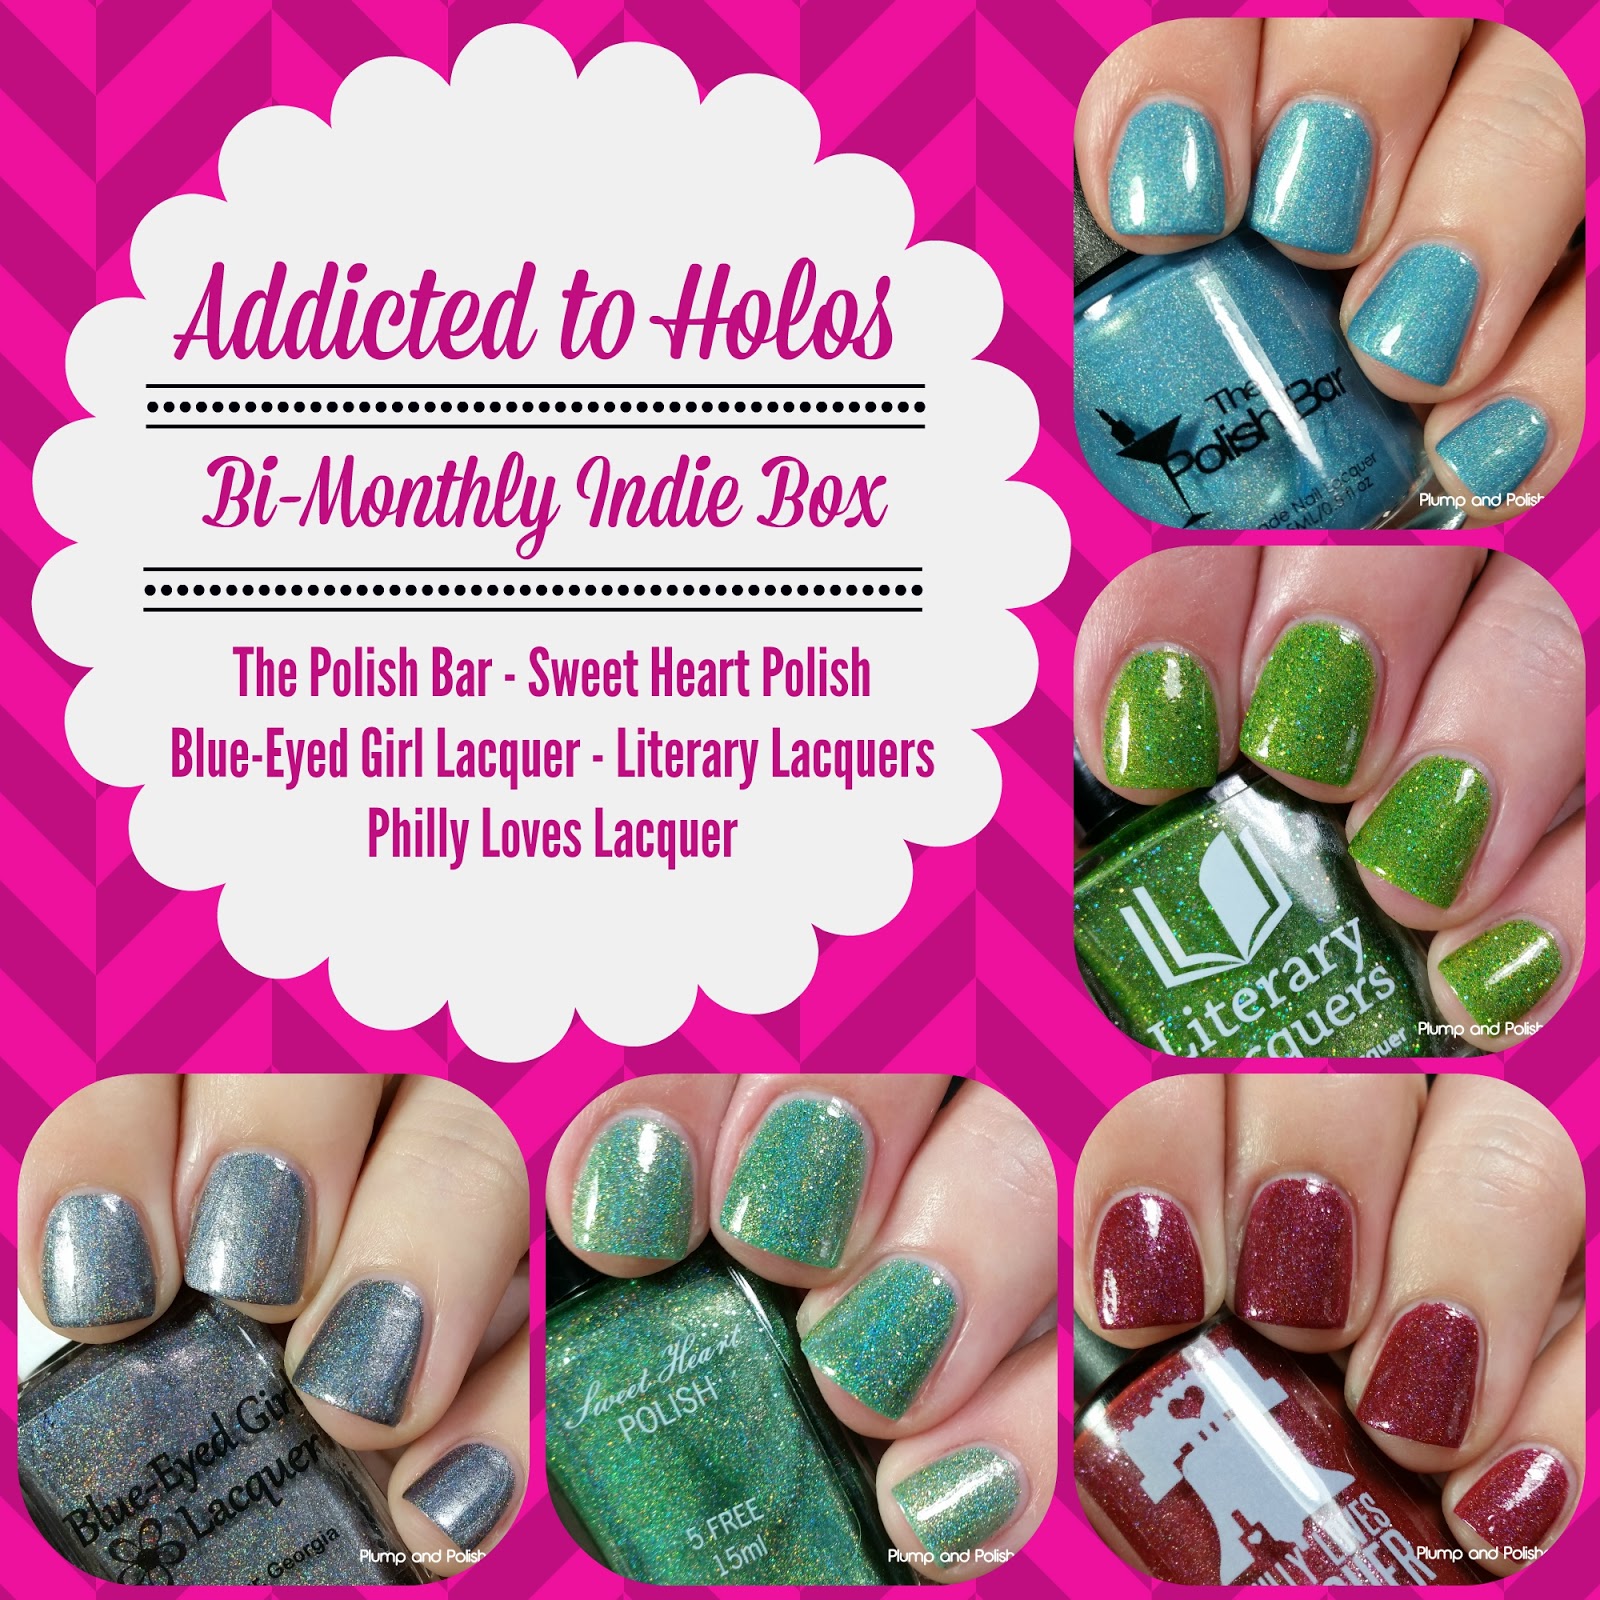 Plump and Polished: Addicted to Holos - Indie Box August 2015